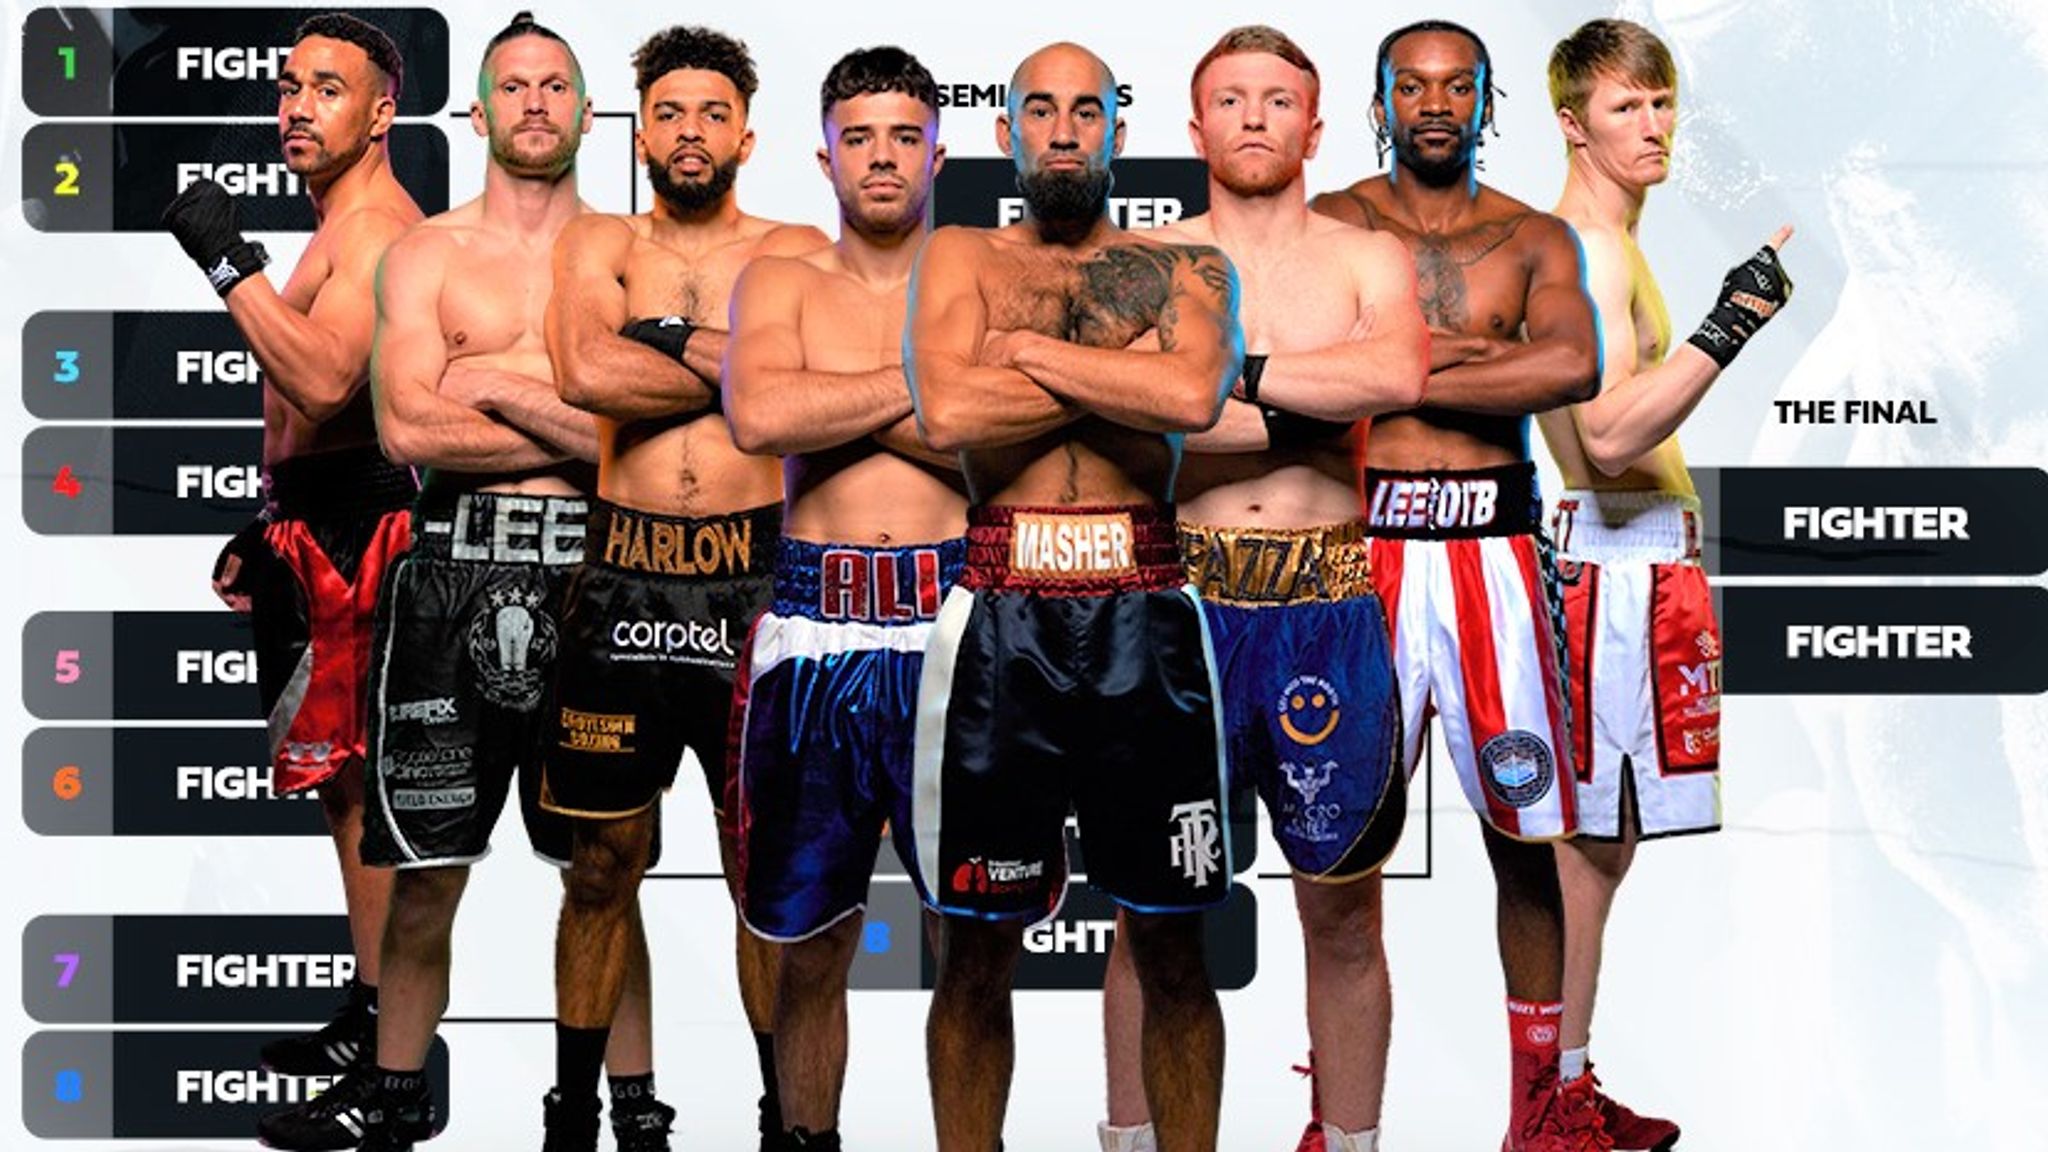 BOXXER Series draw to determine who will fight who